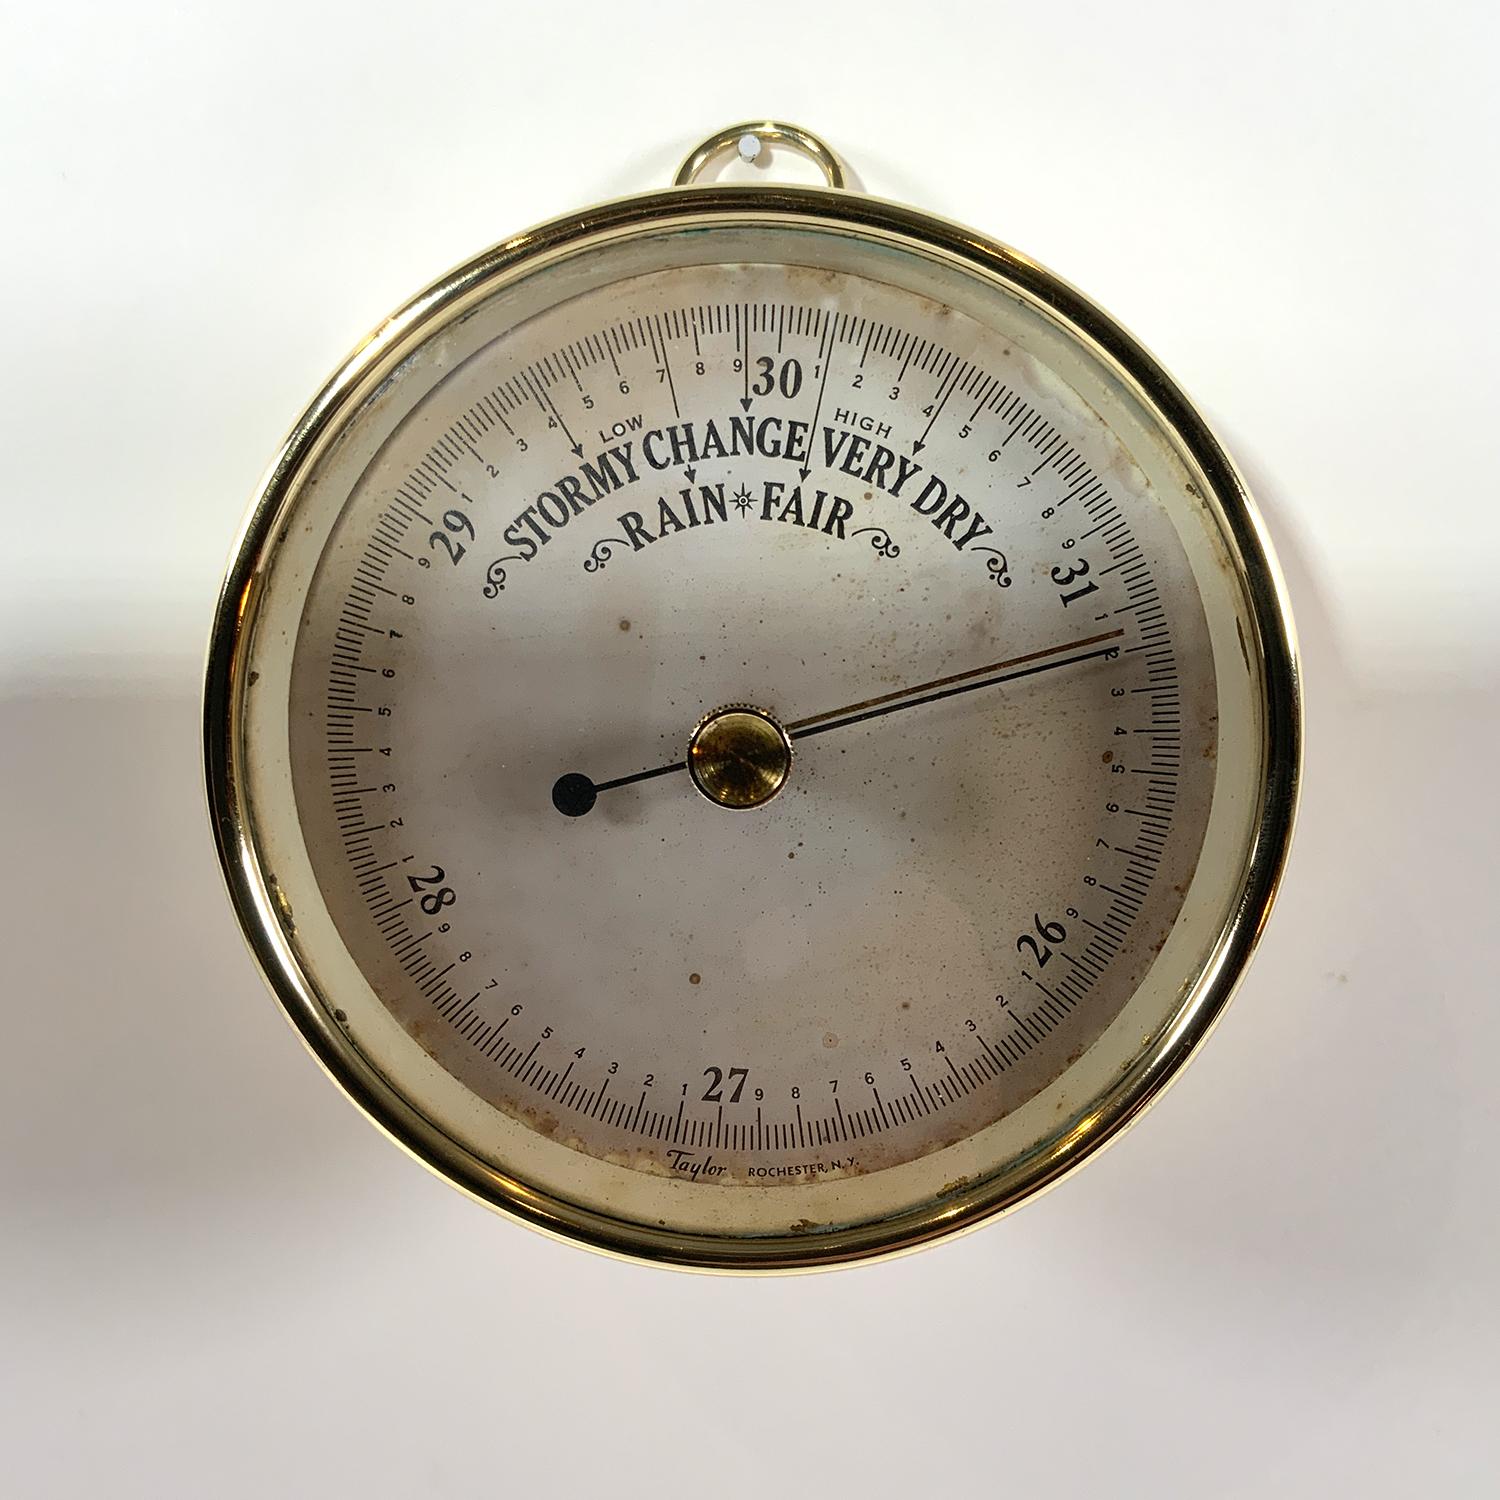 Gentleman's solid brass library barometer. Also known as a 